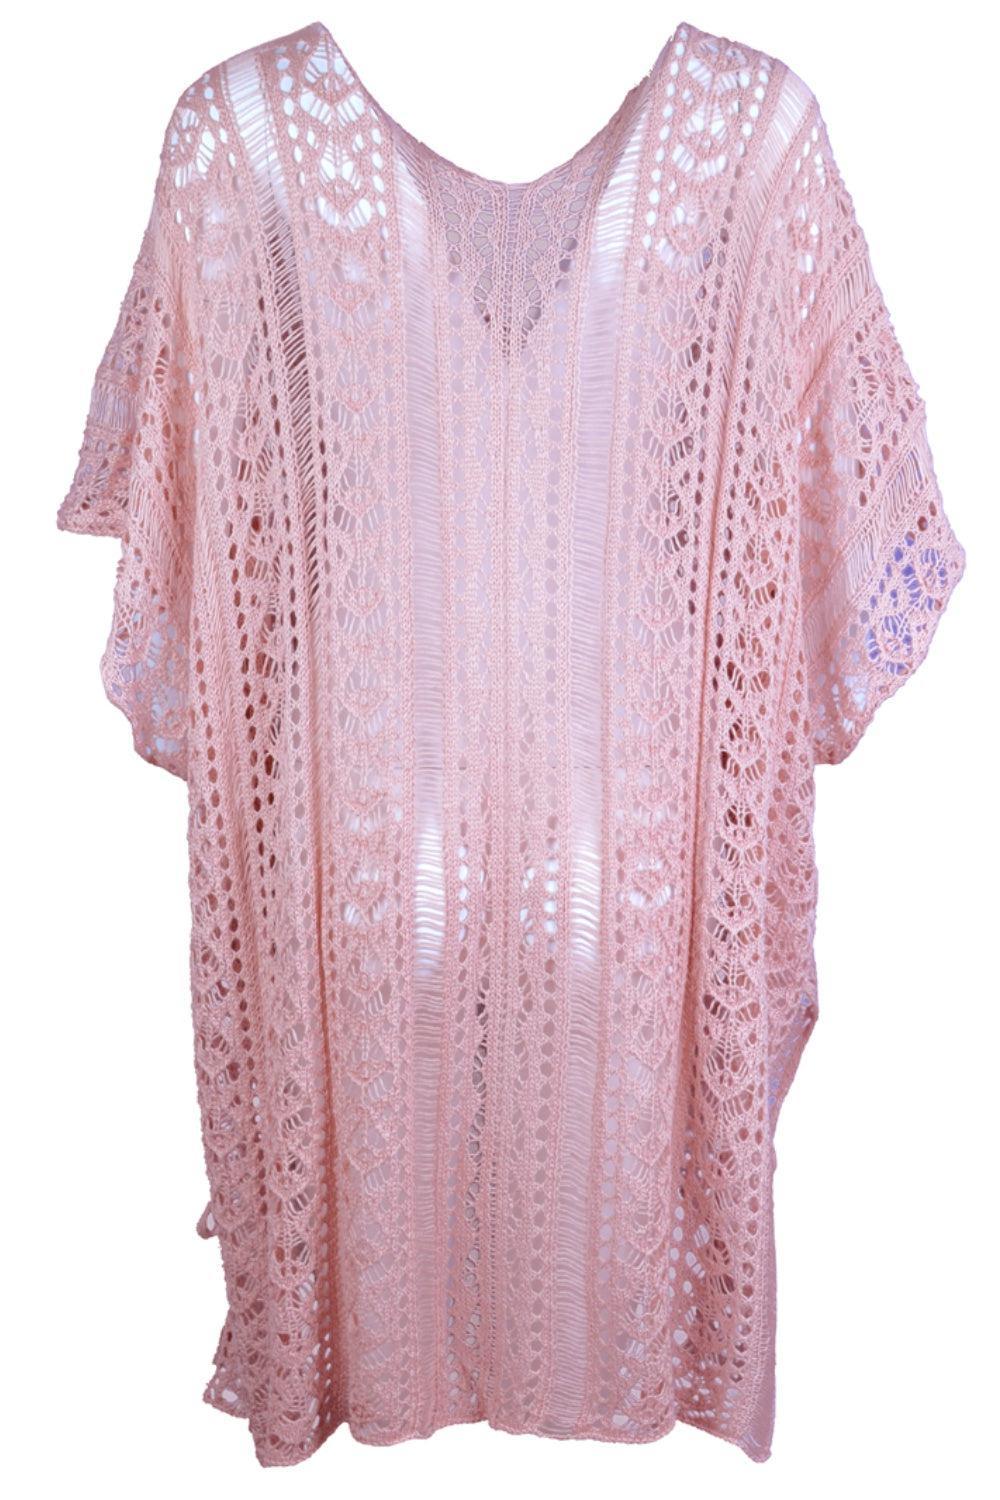 a pink top with a crochet pattern on it